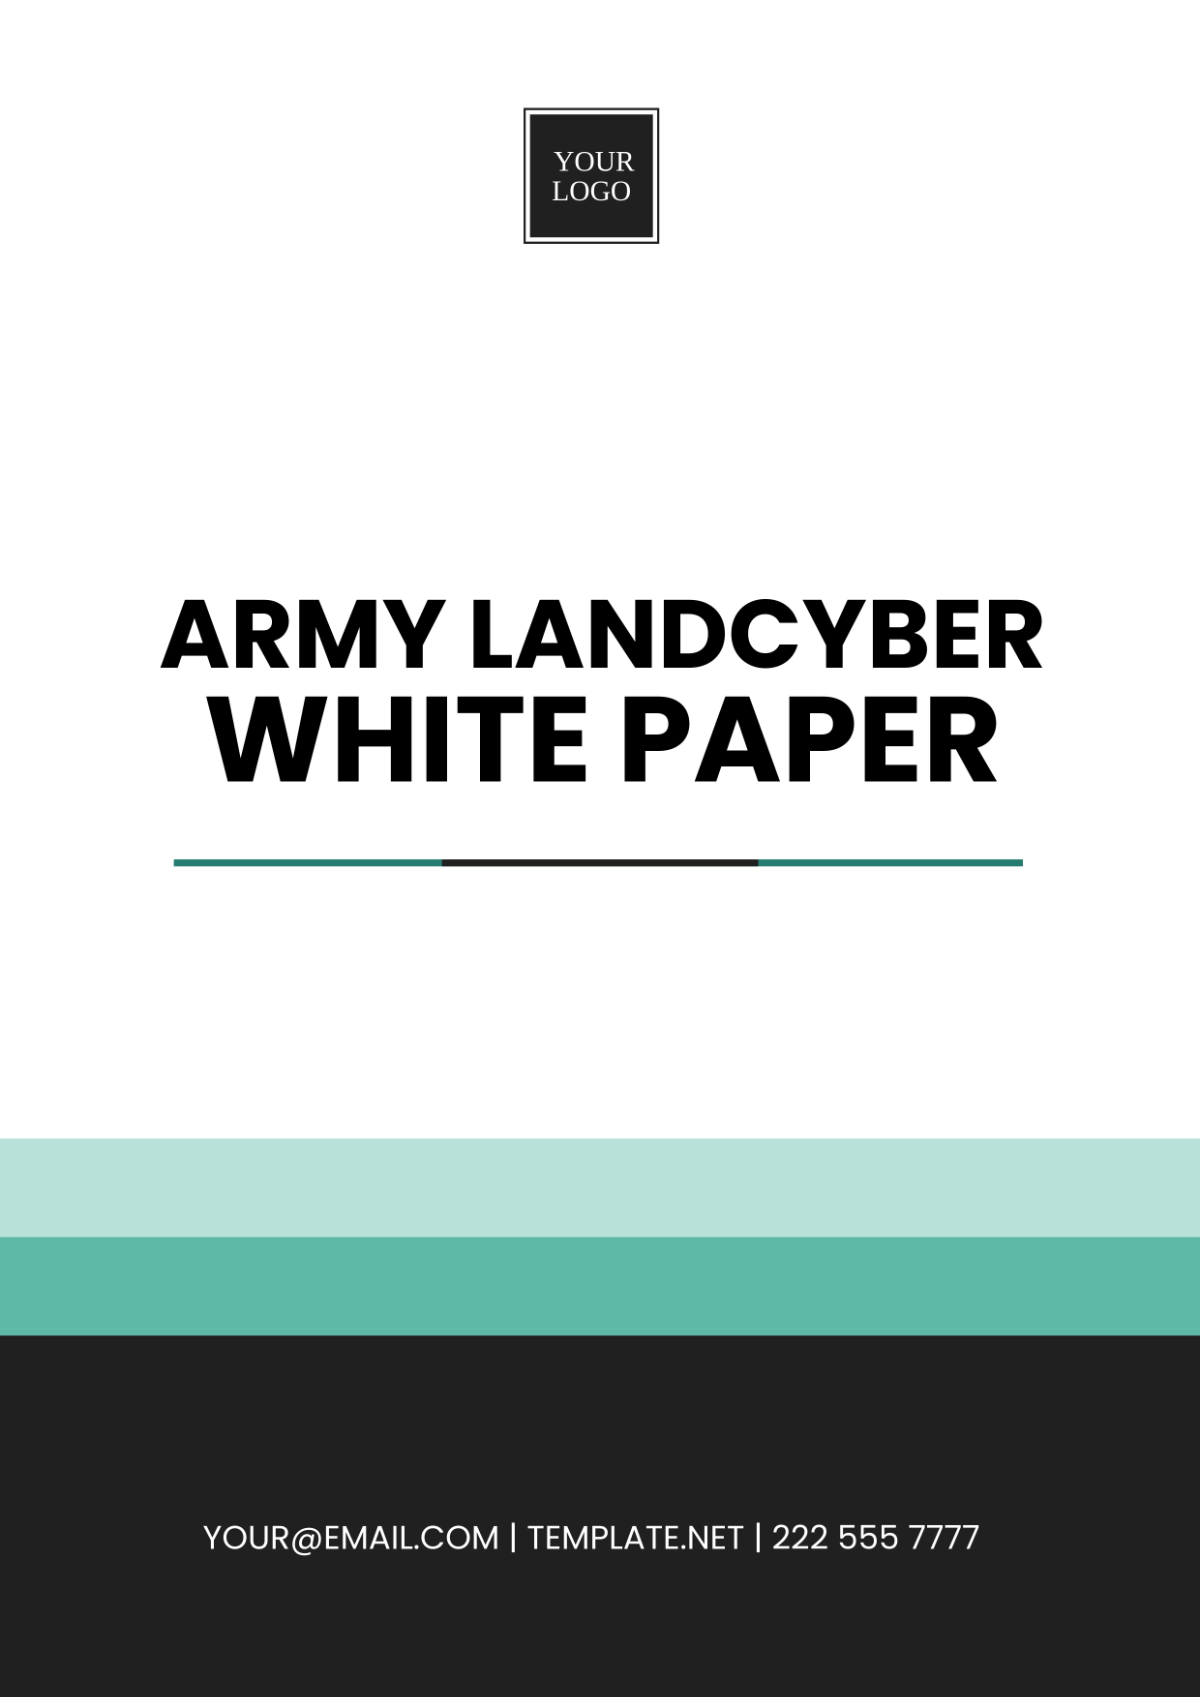 Army LandCyber White Paper Template